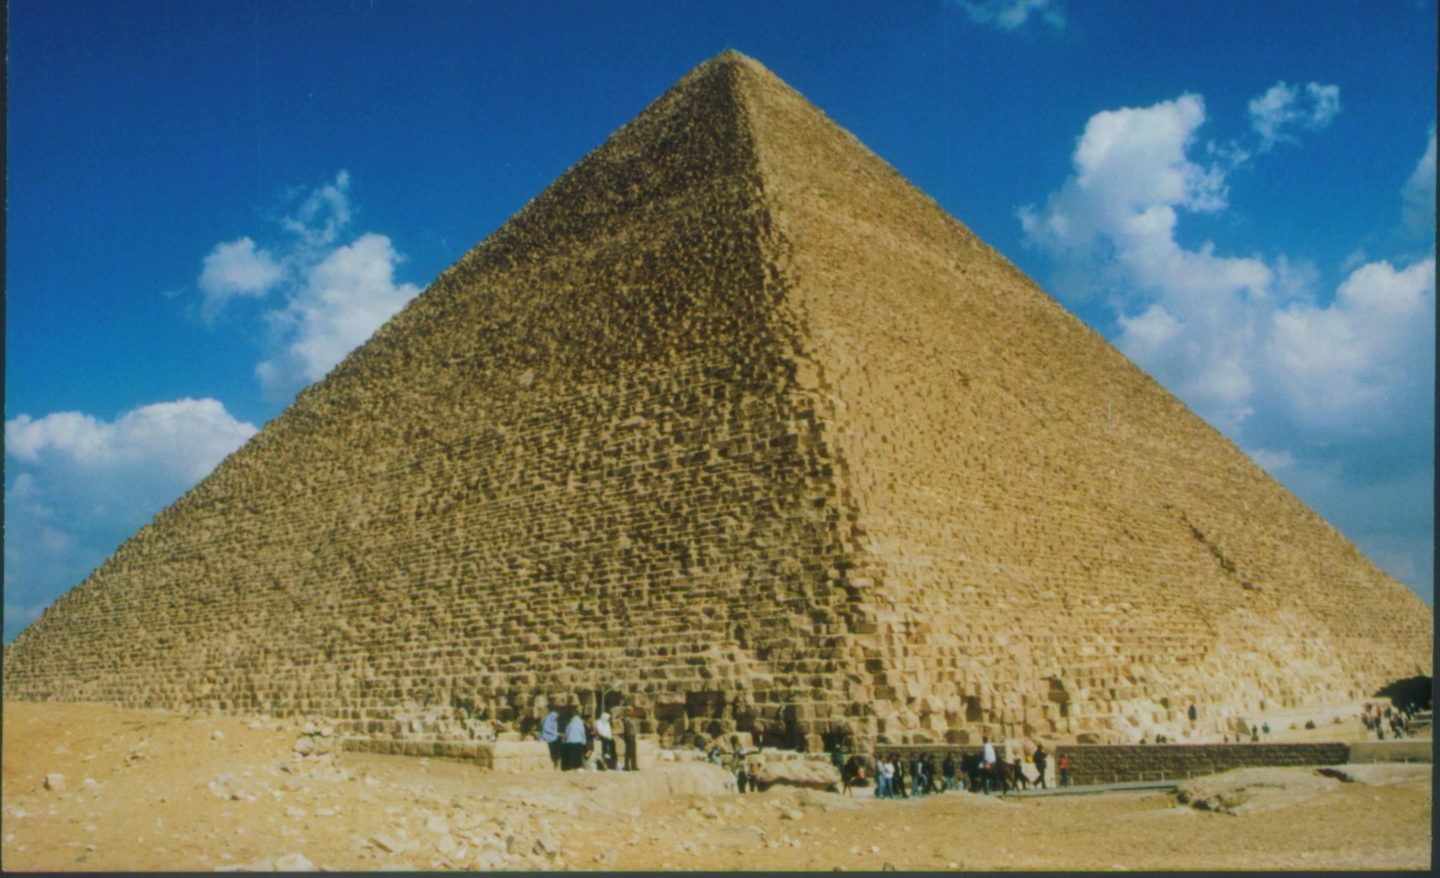 Cheops Pyramids of Egypt 1998